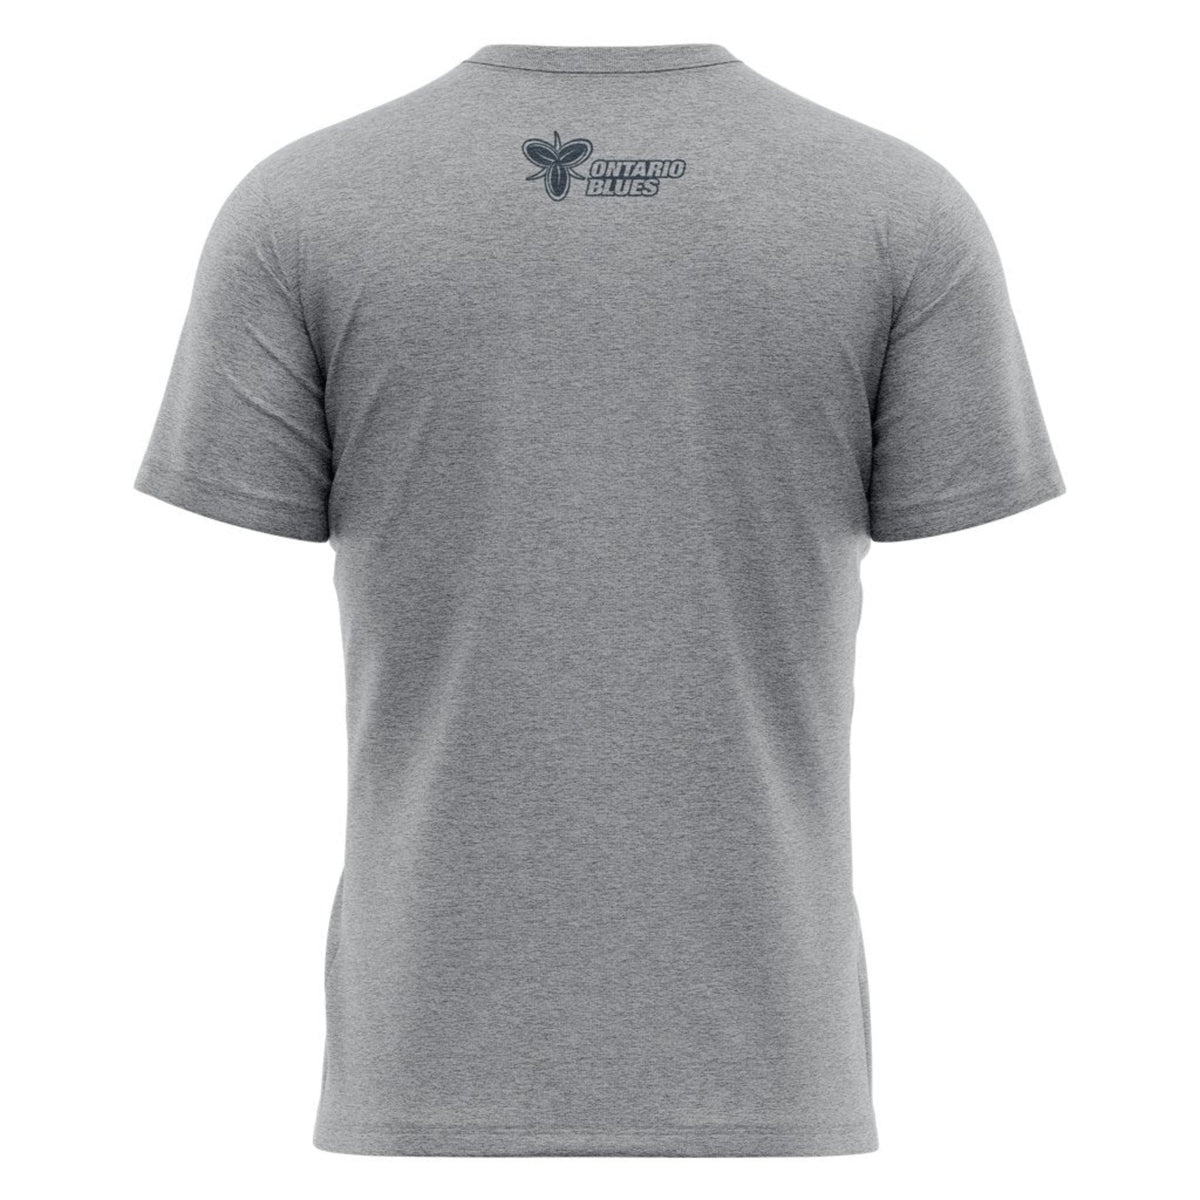 Ontario Blues &quot;High Performance Distress&quot; Tee - Back - Men&#39;s Sizing XS-4XL - Athletic Grey